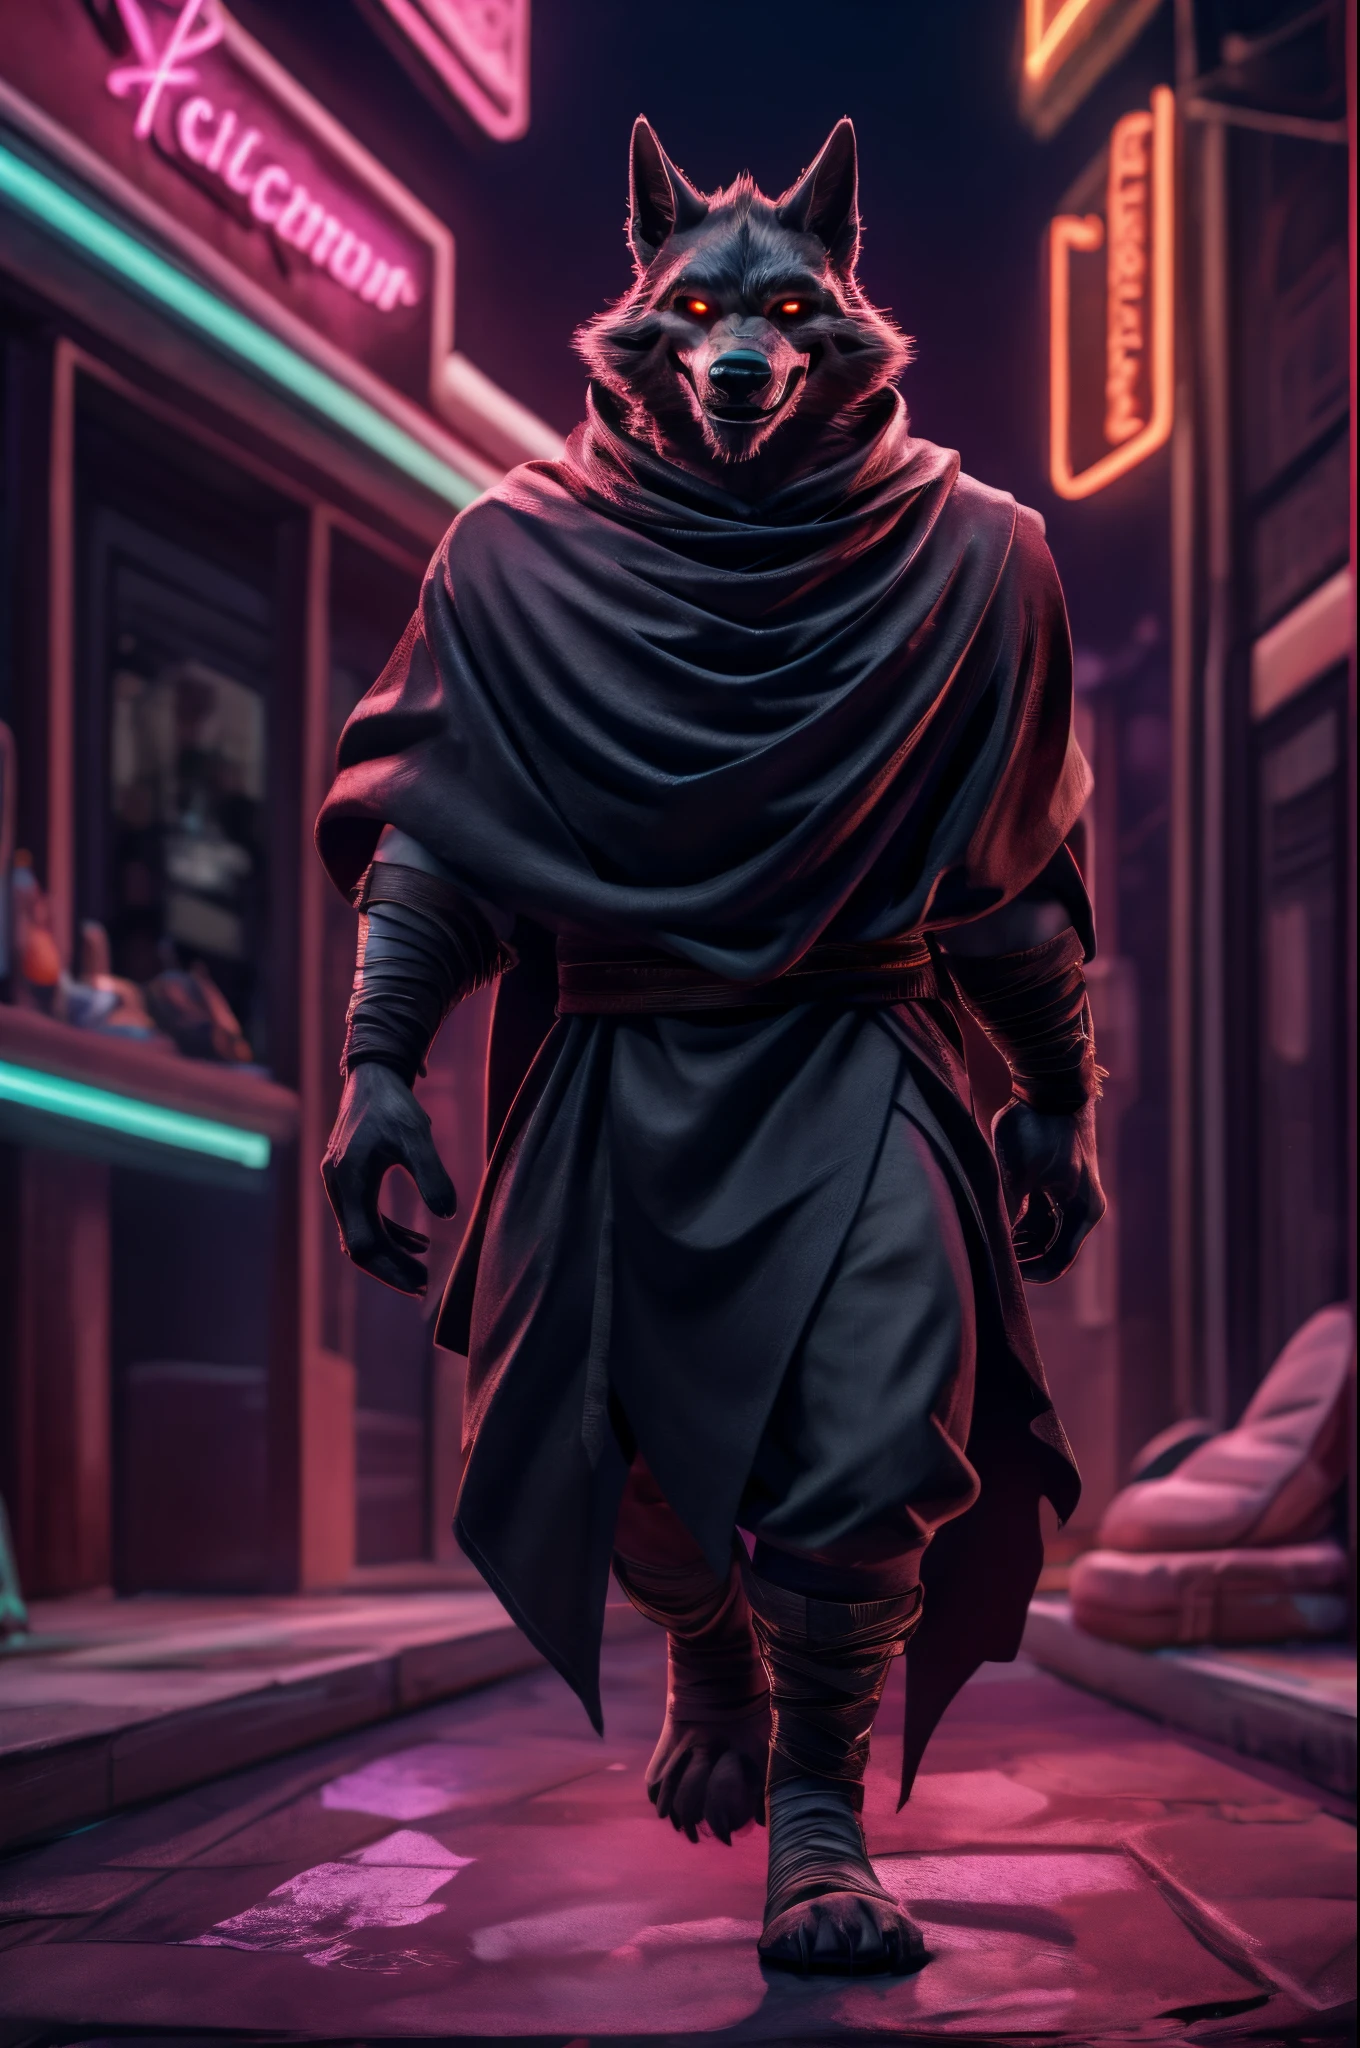 death (puss in boots), male, black monk clothes, smile, full body, red eye, detailed face, perfect fur, high quality, dark overlays around body, neon lights background